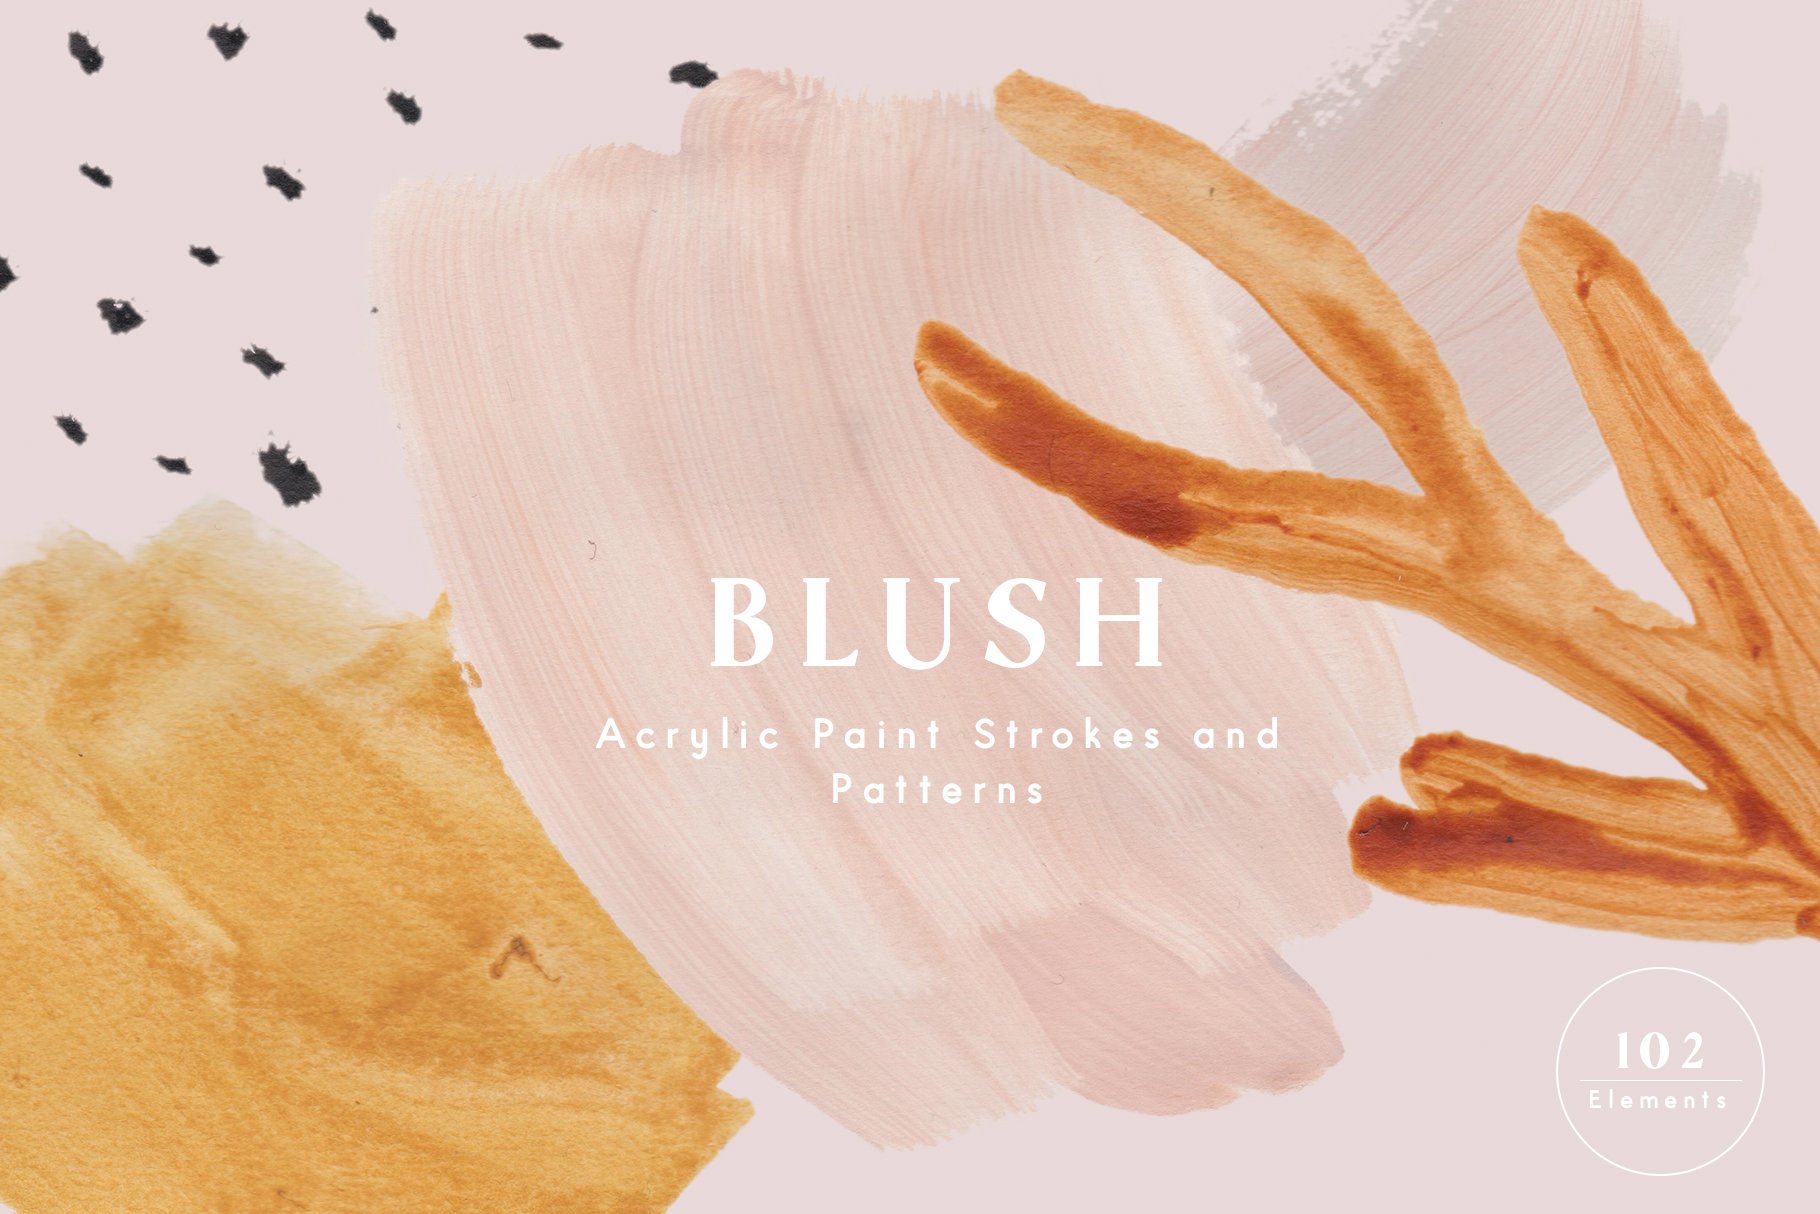 Blush Acrylic Paint Strokes cover image.